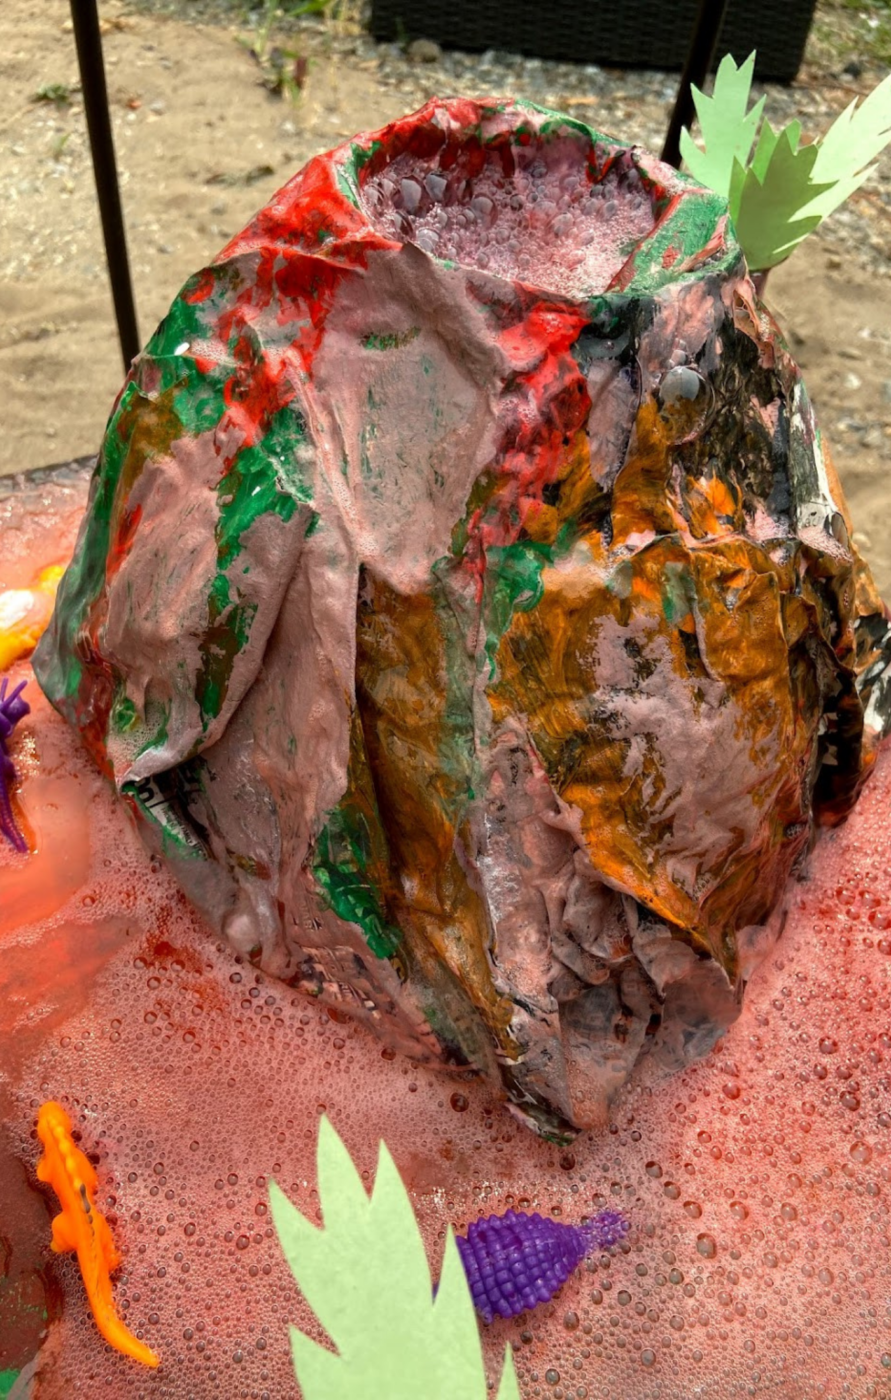 Paper mache volcano with little plastic dinosaurs and red "lava".